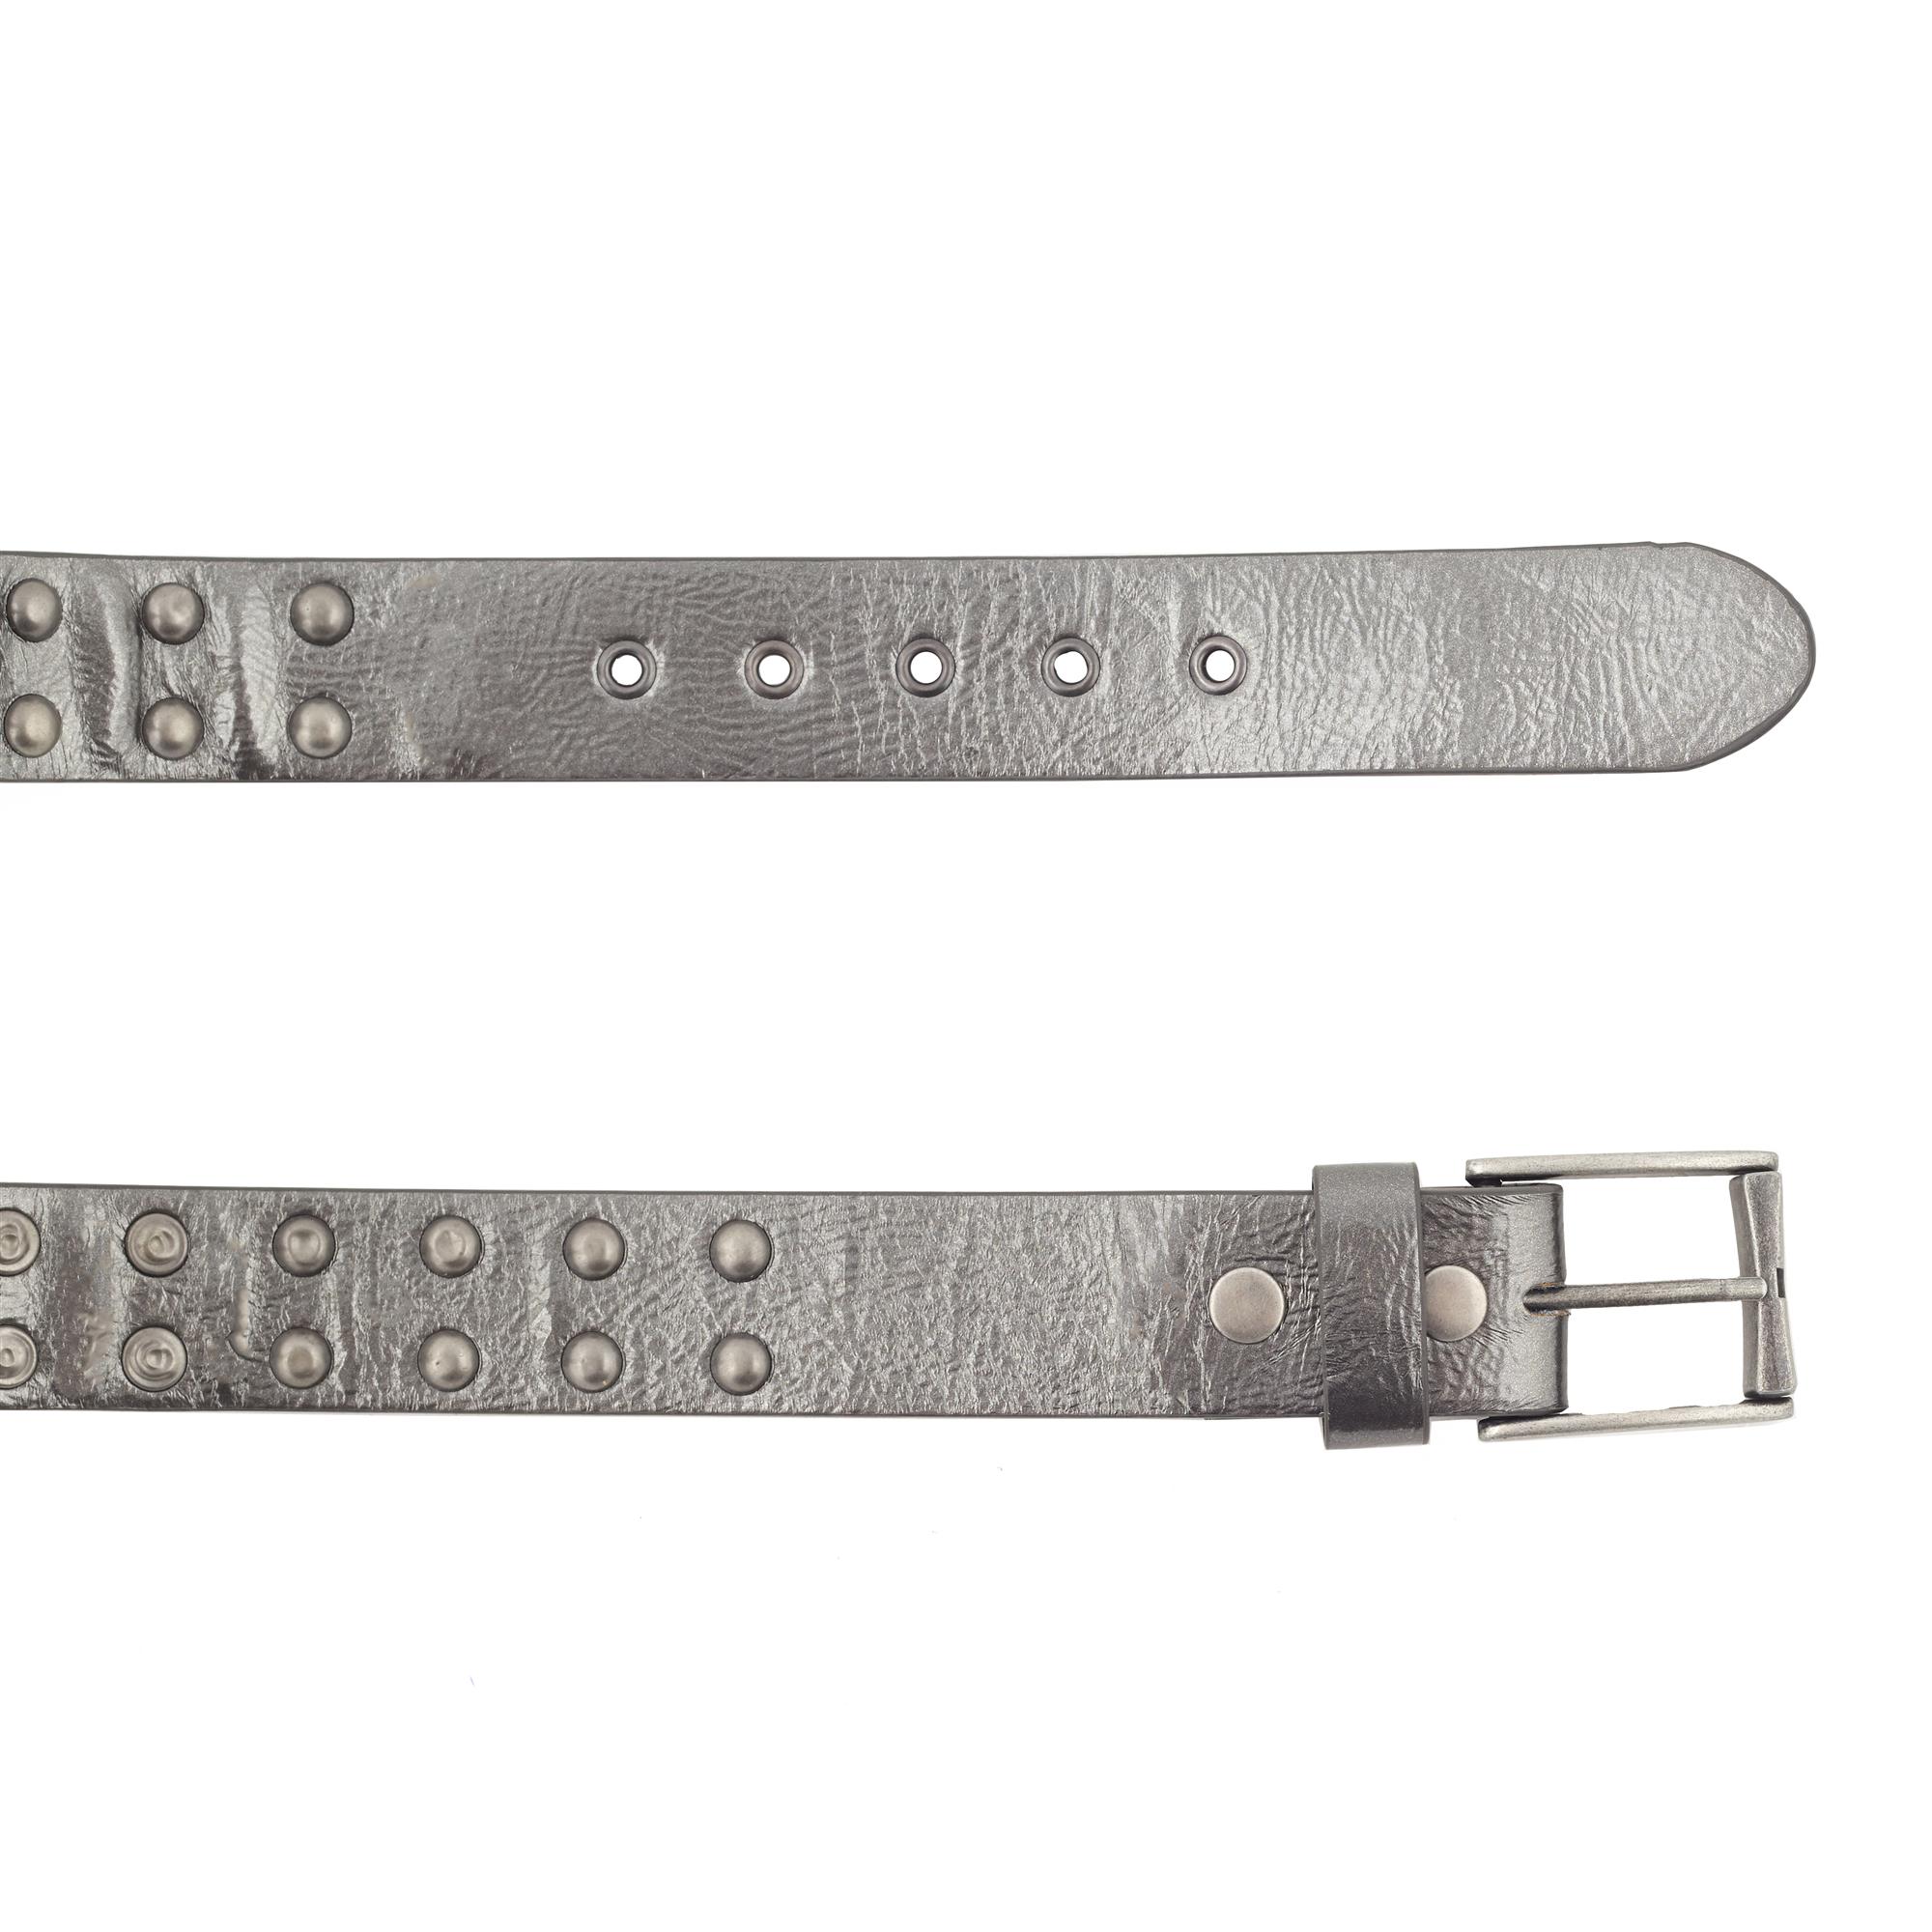 LEATHER BELT Pins 2 Rows Grey - 14